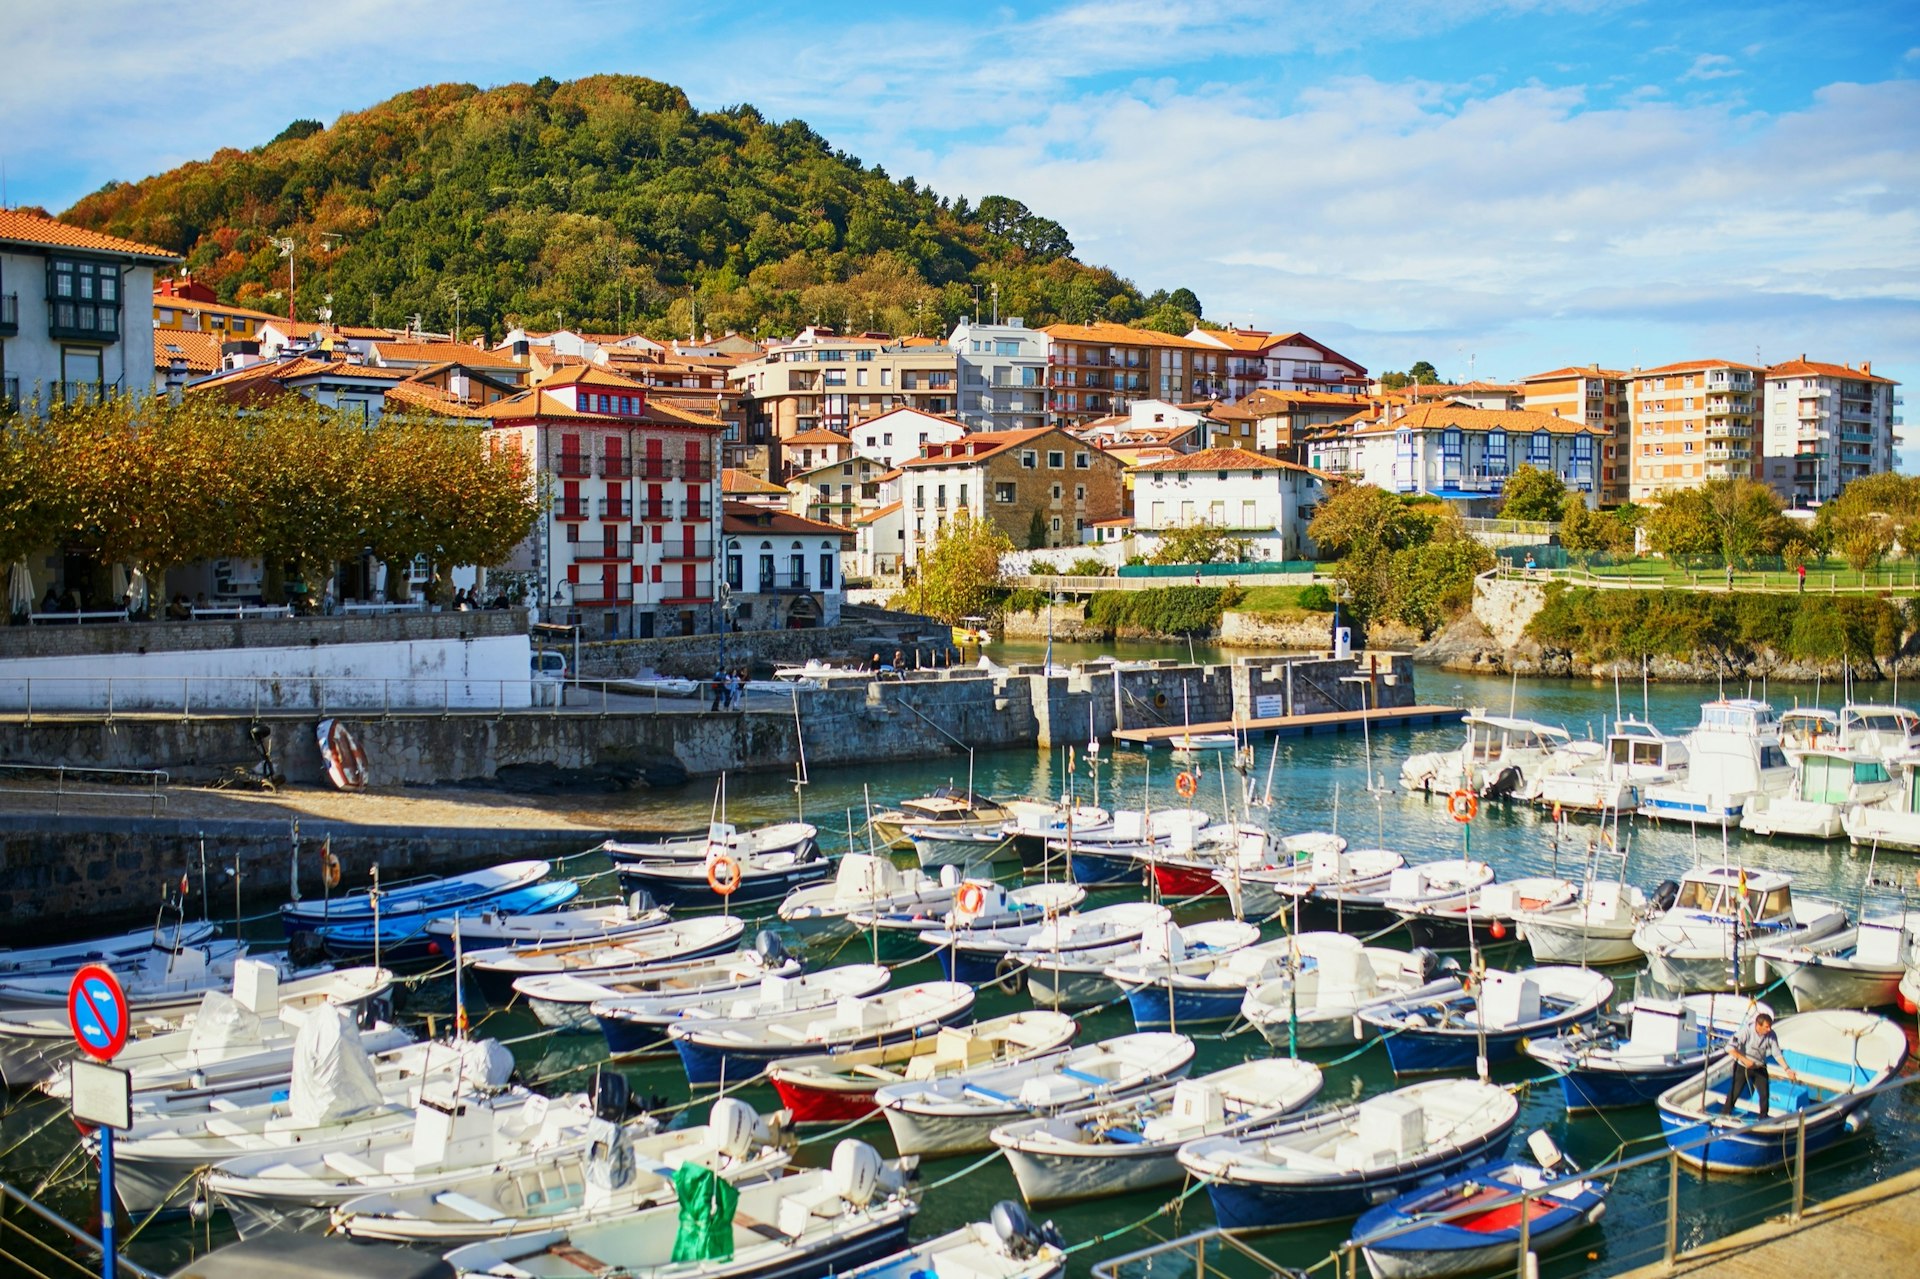 Boats,In,Port,Of,A,Fishing,Village,Mundaka,,Basque,Country,